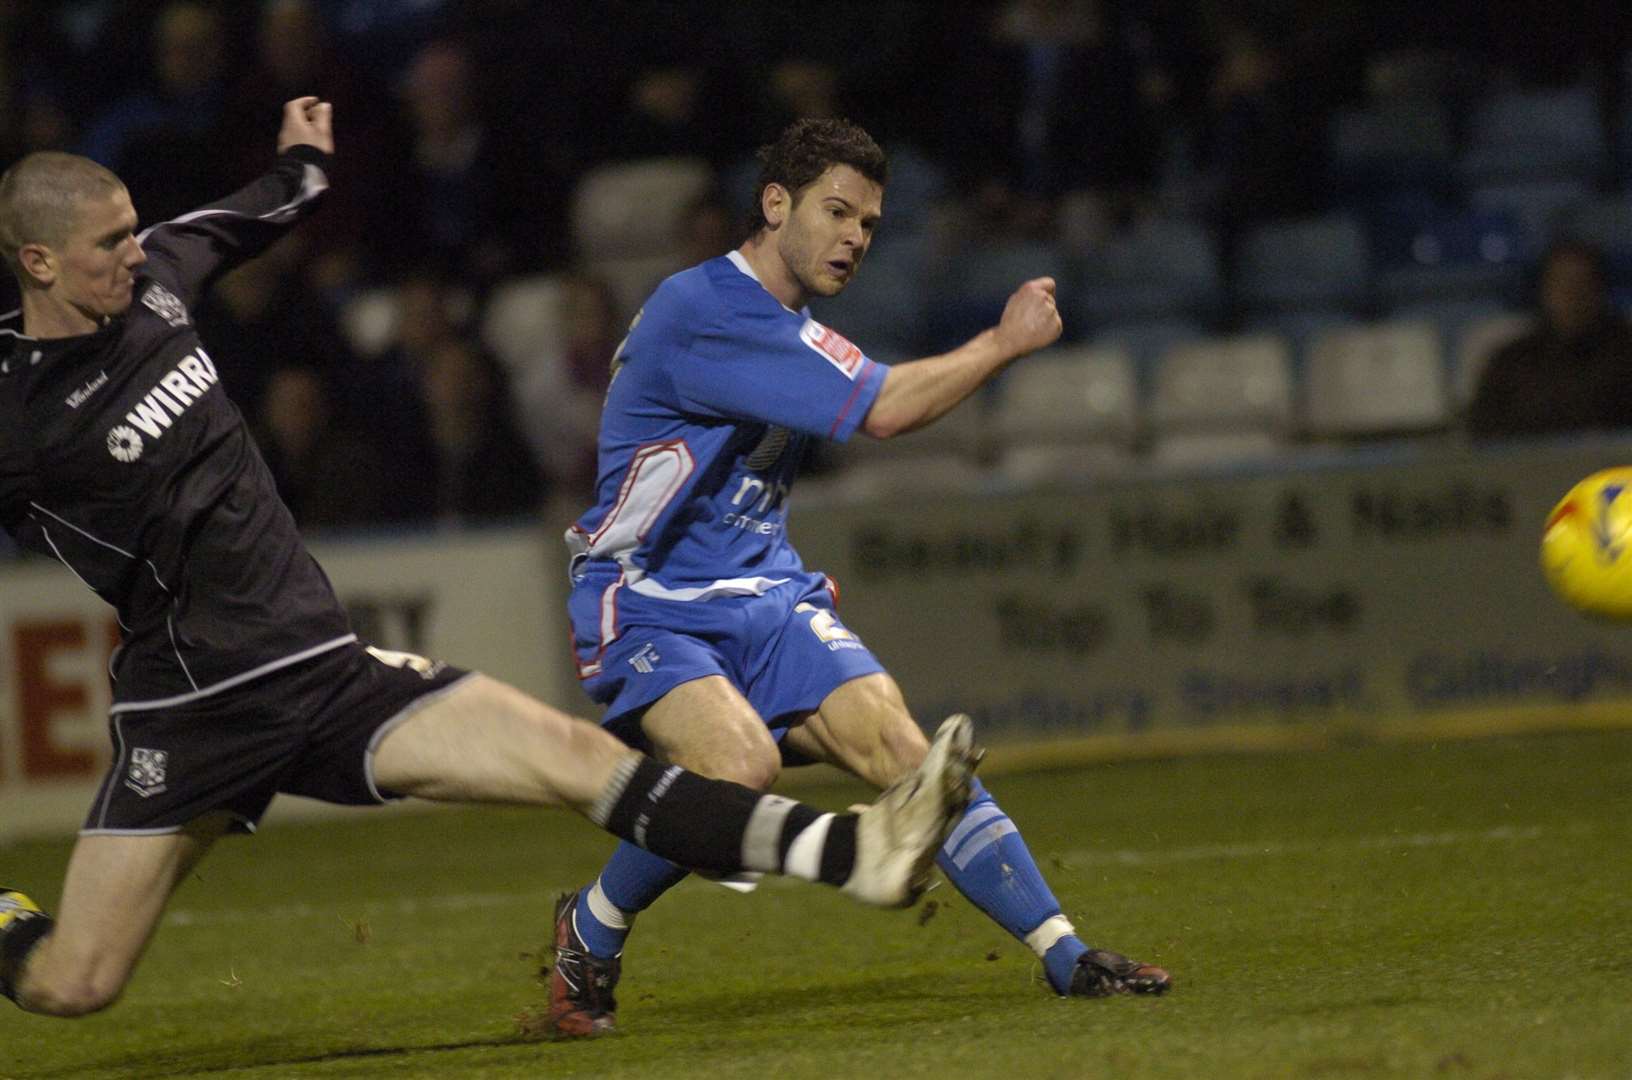 Matt Jarvis goes for goal against Tranmere in the 2006/7 season Picture: Grant Falvey